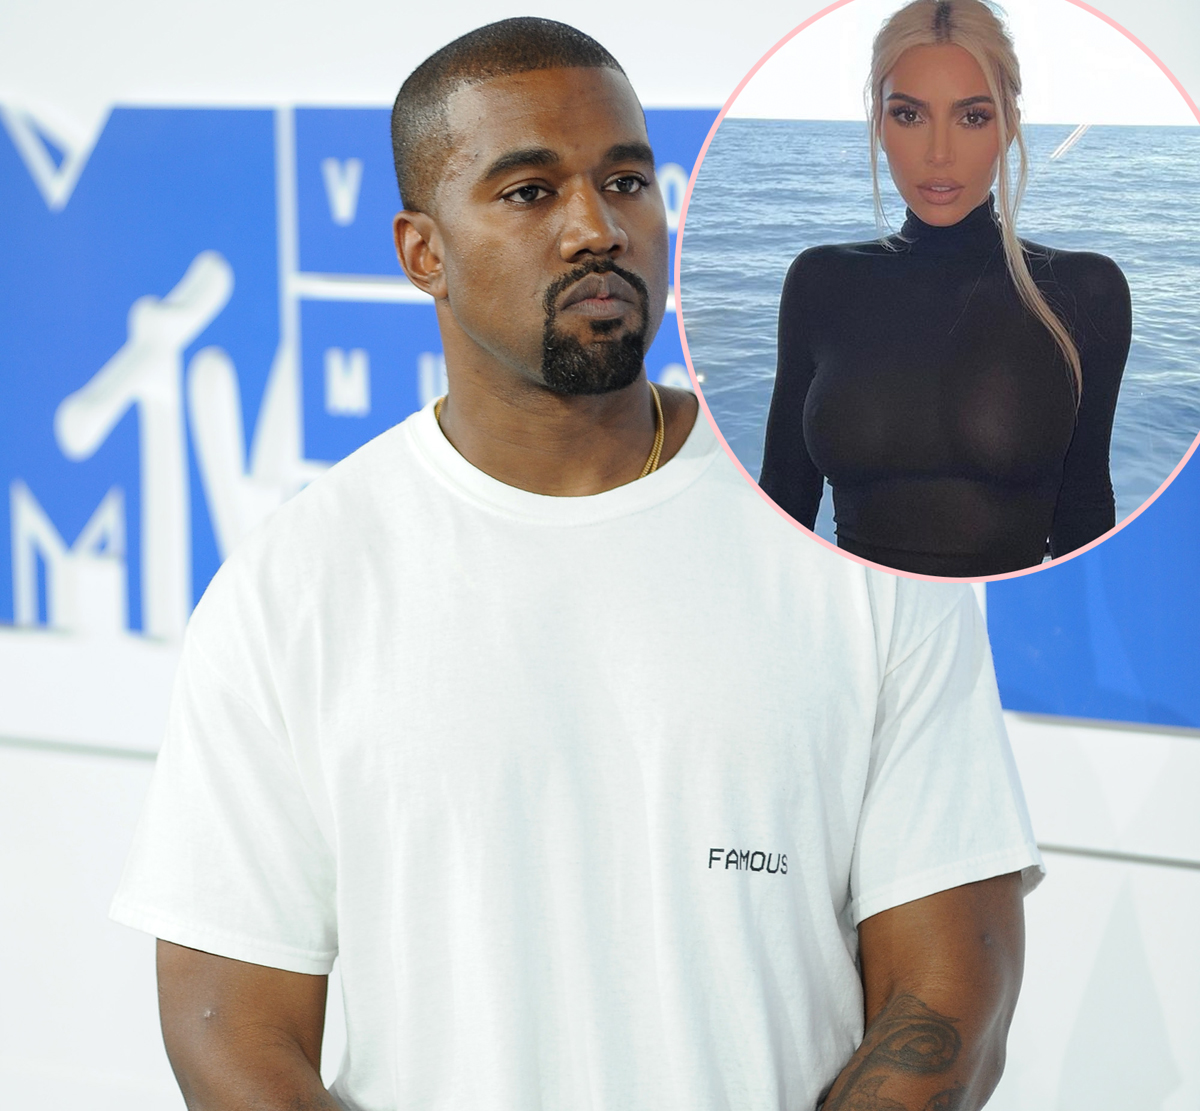 #Kanye West Defends His Instagram Rants & Refusal To ‘Compromise’ With Kim Kardashian On Their Kids’ Schooling